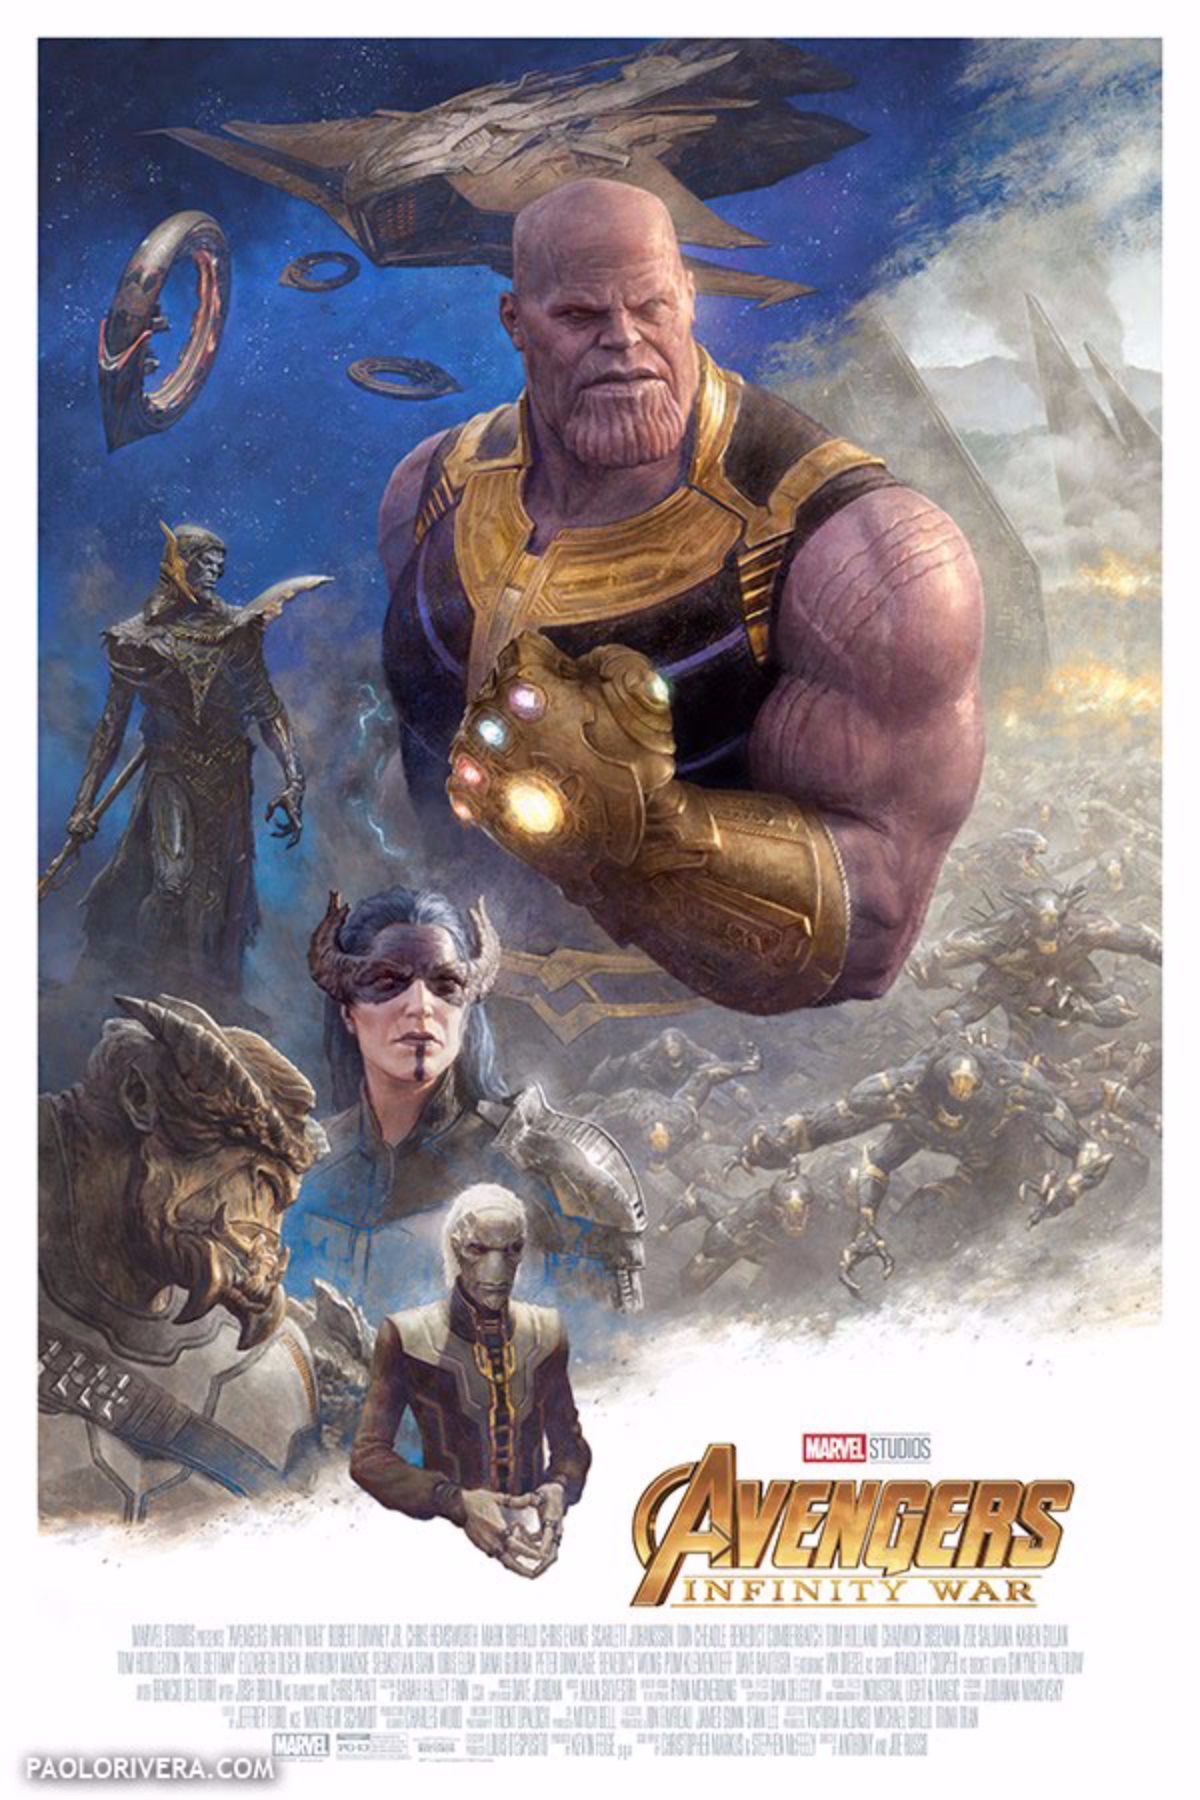 infinity War cast and crew poster